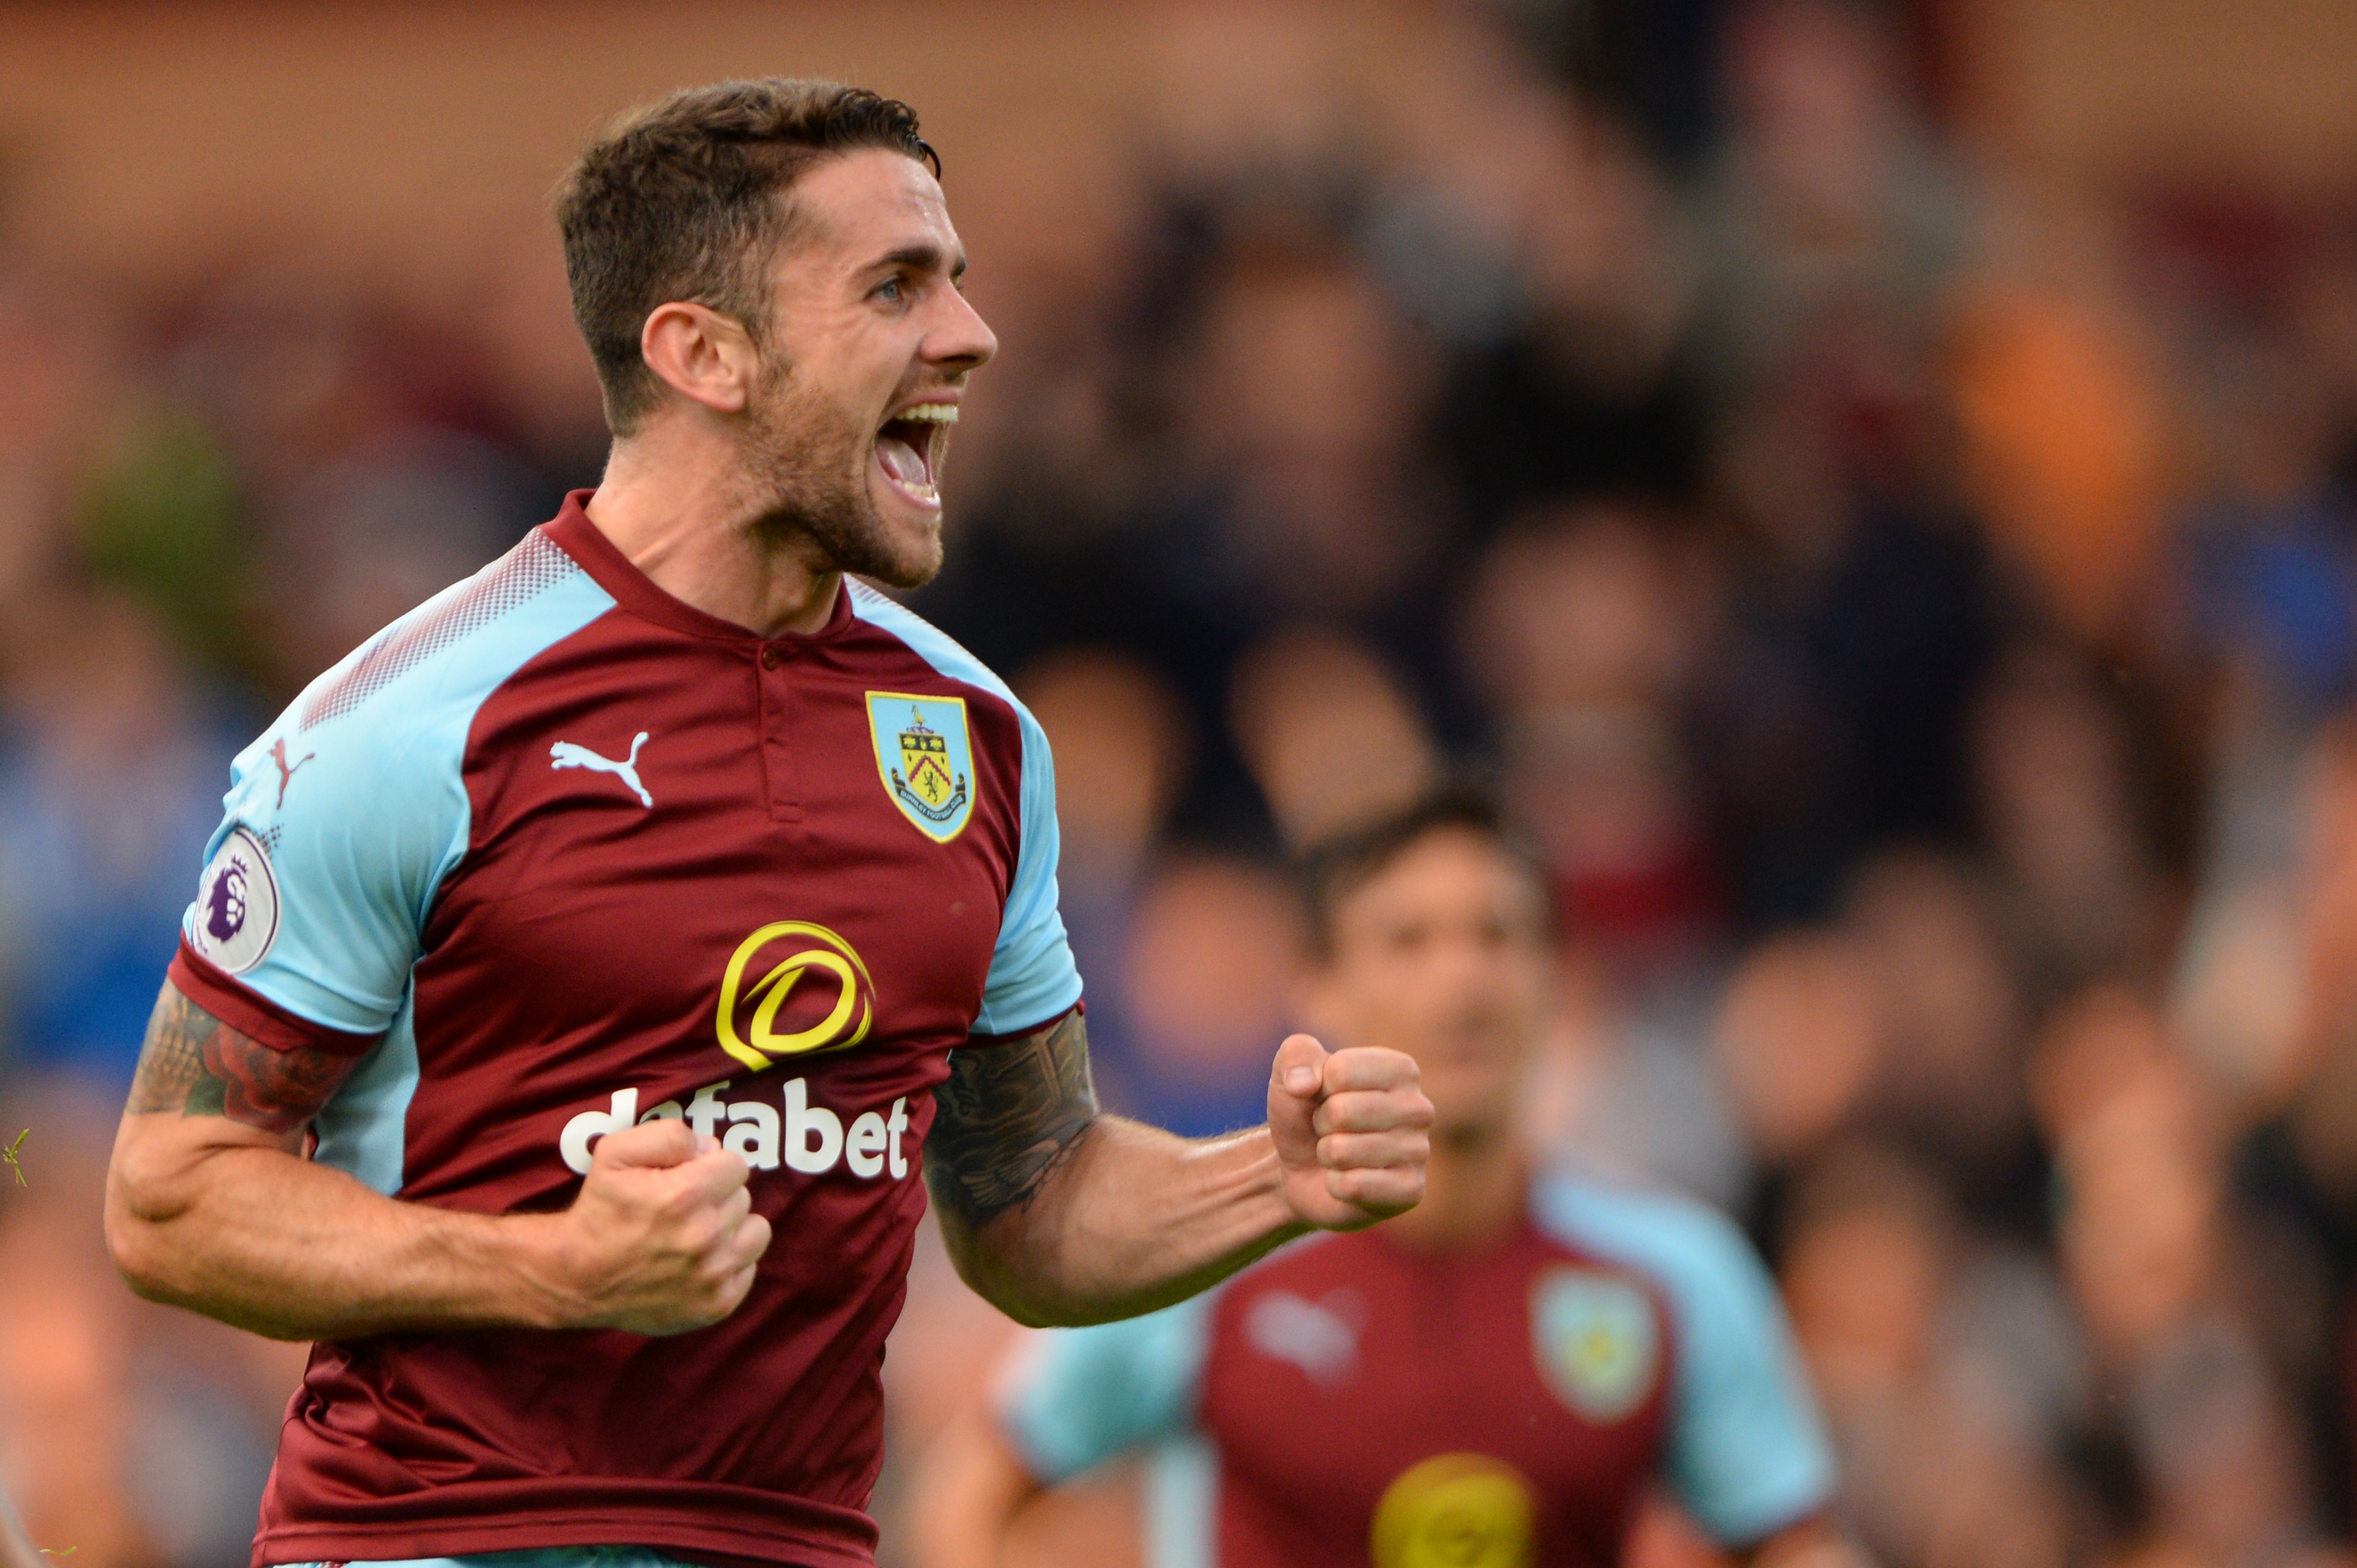 BURNLEY, ENGLAND - AUGUST 01: Robbie Brady of Burnley celebrates during the pre-season friendly match between Burnley and Celta Vigo at Turf Moor on August 1, 2017 in Burnley, England. (Photo by Nathan Stirk/Getty Images)